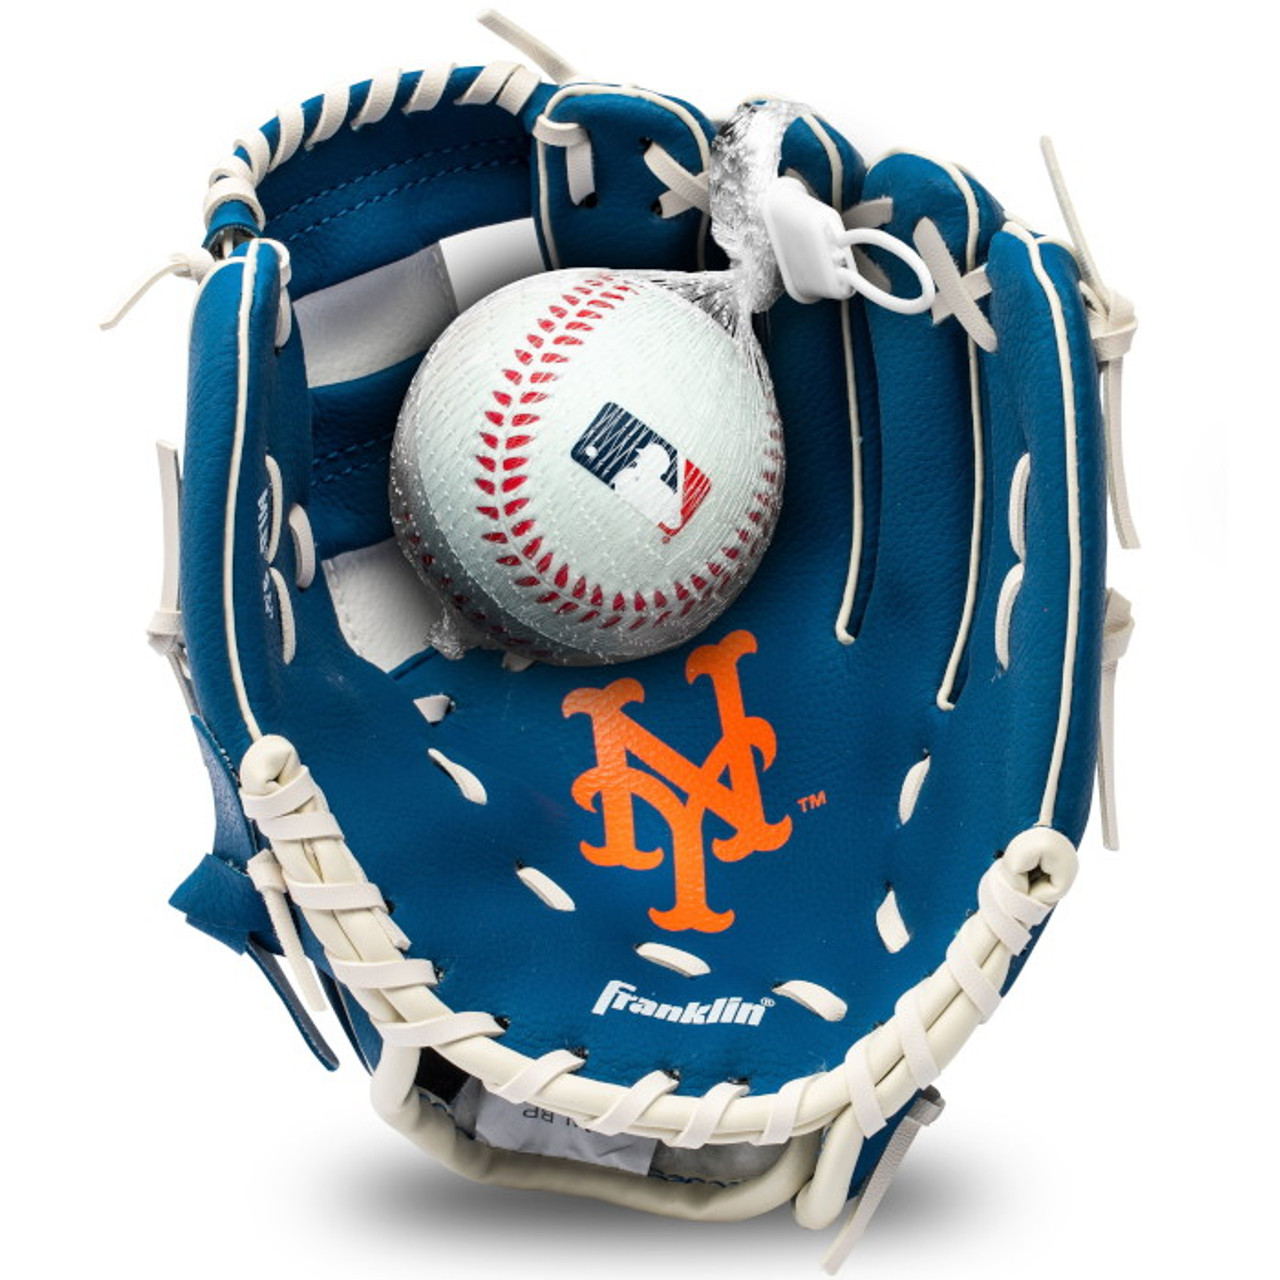 Franklin New York Mets 9.5 Team Logo Youth Glove and Ball Set